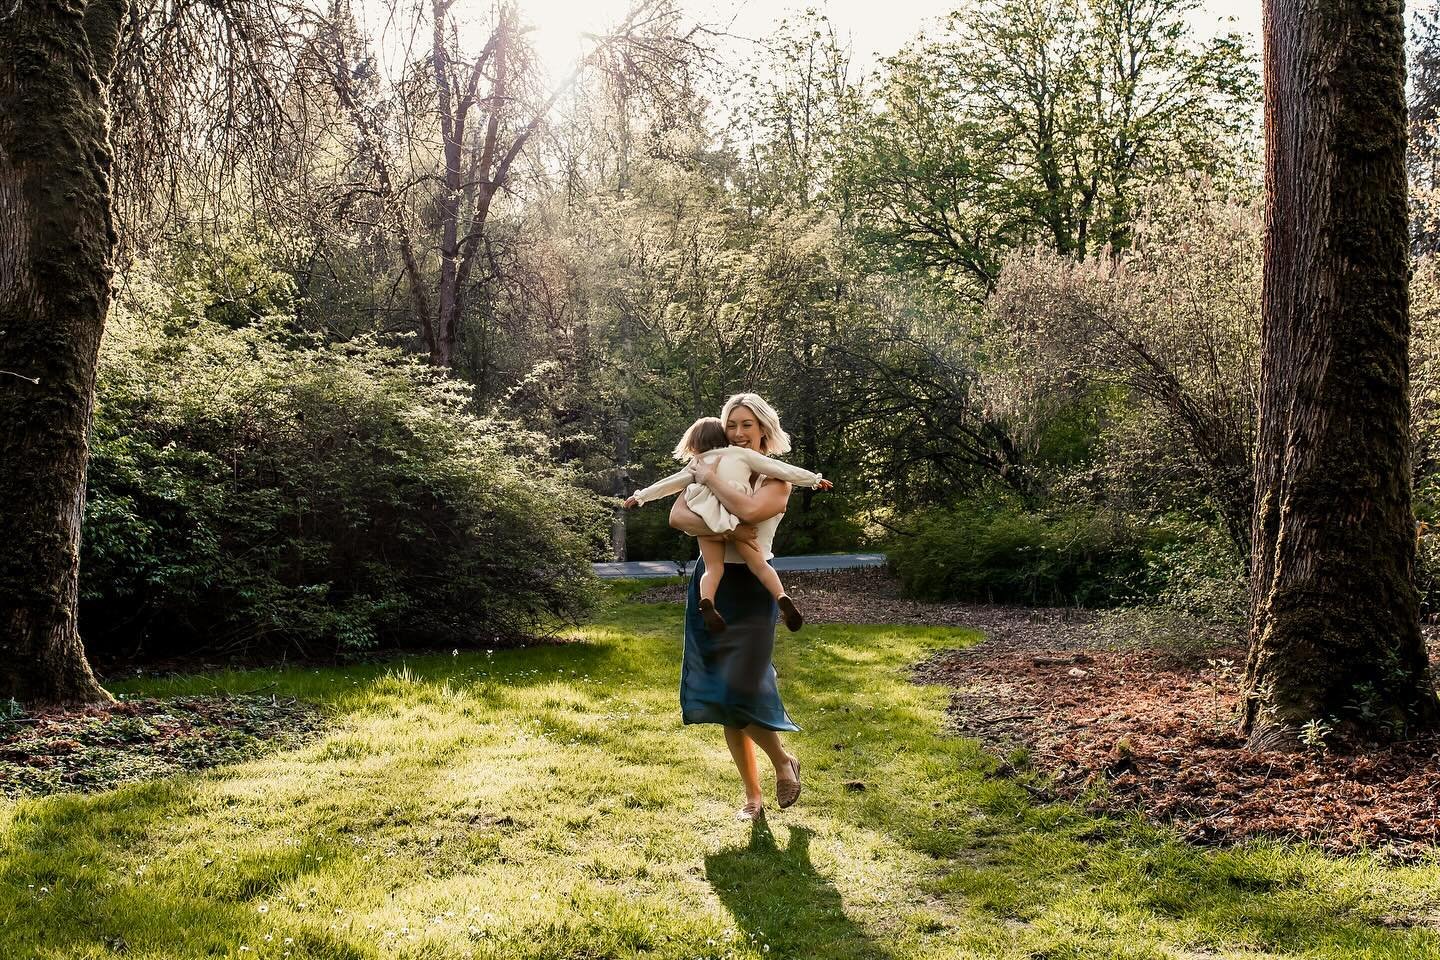 Sneak peek from Sundays gorgeous Spring family session. The weather was perfect, the family was perfect, everything was perfect. 🤩 
.
.
.
.
#seattlefamilyphotographer #springfamilyphotos #seattlematernityphotographer #washingtonparkarboretum